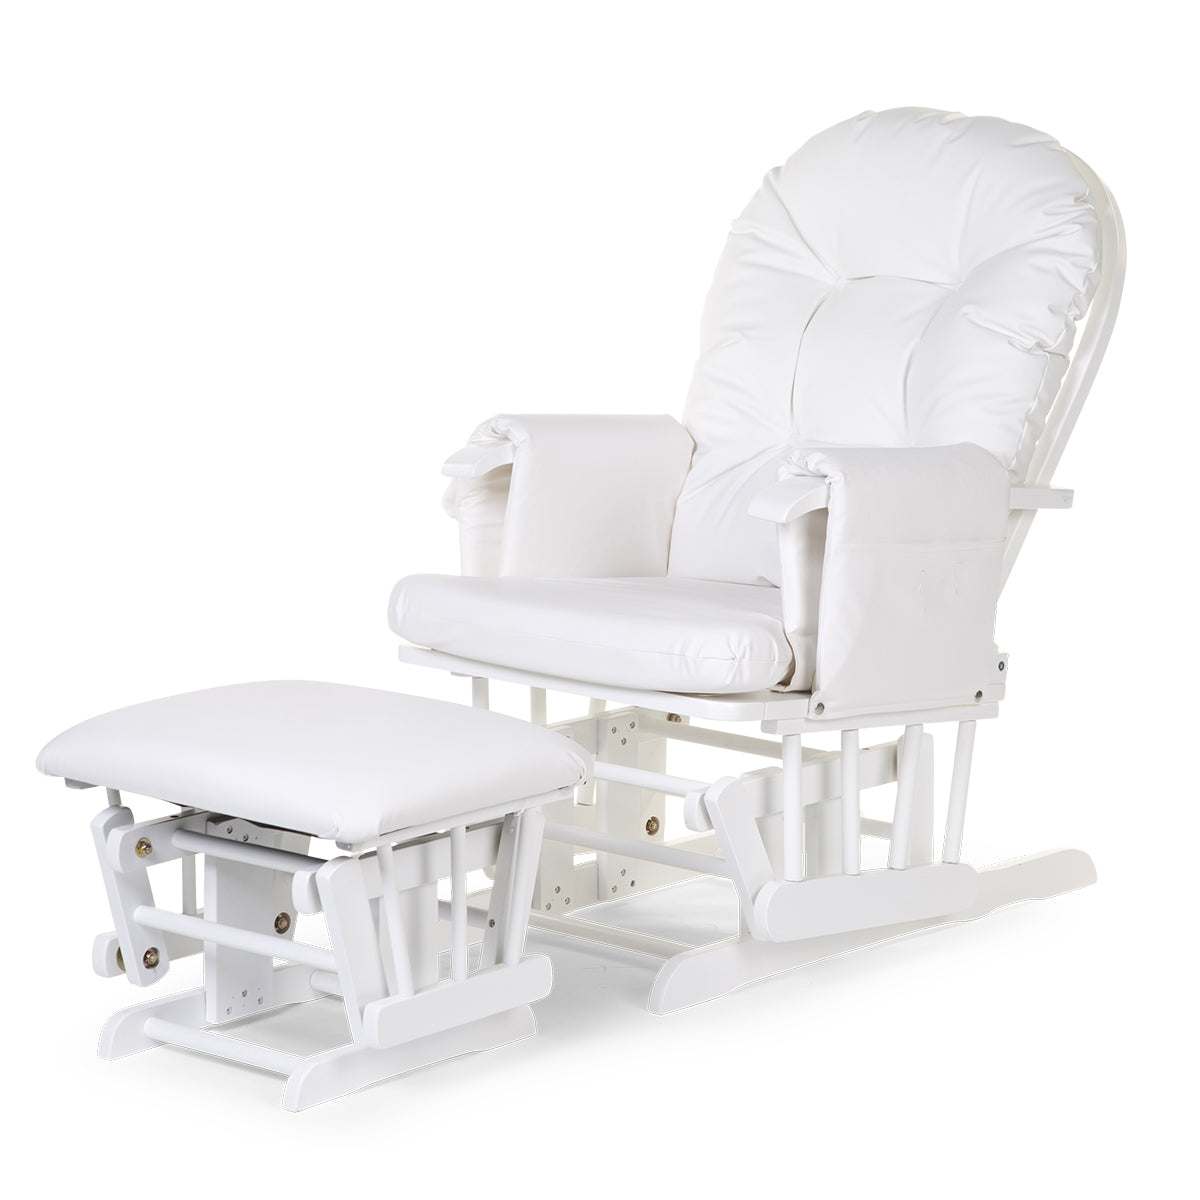 Childhome Gliding Chair With Footrest (White)